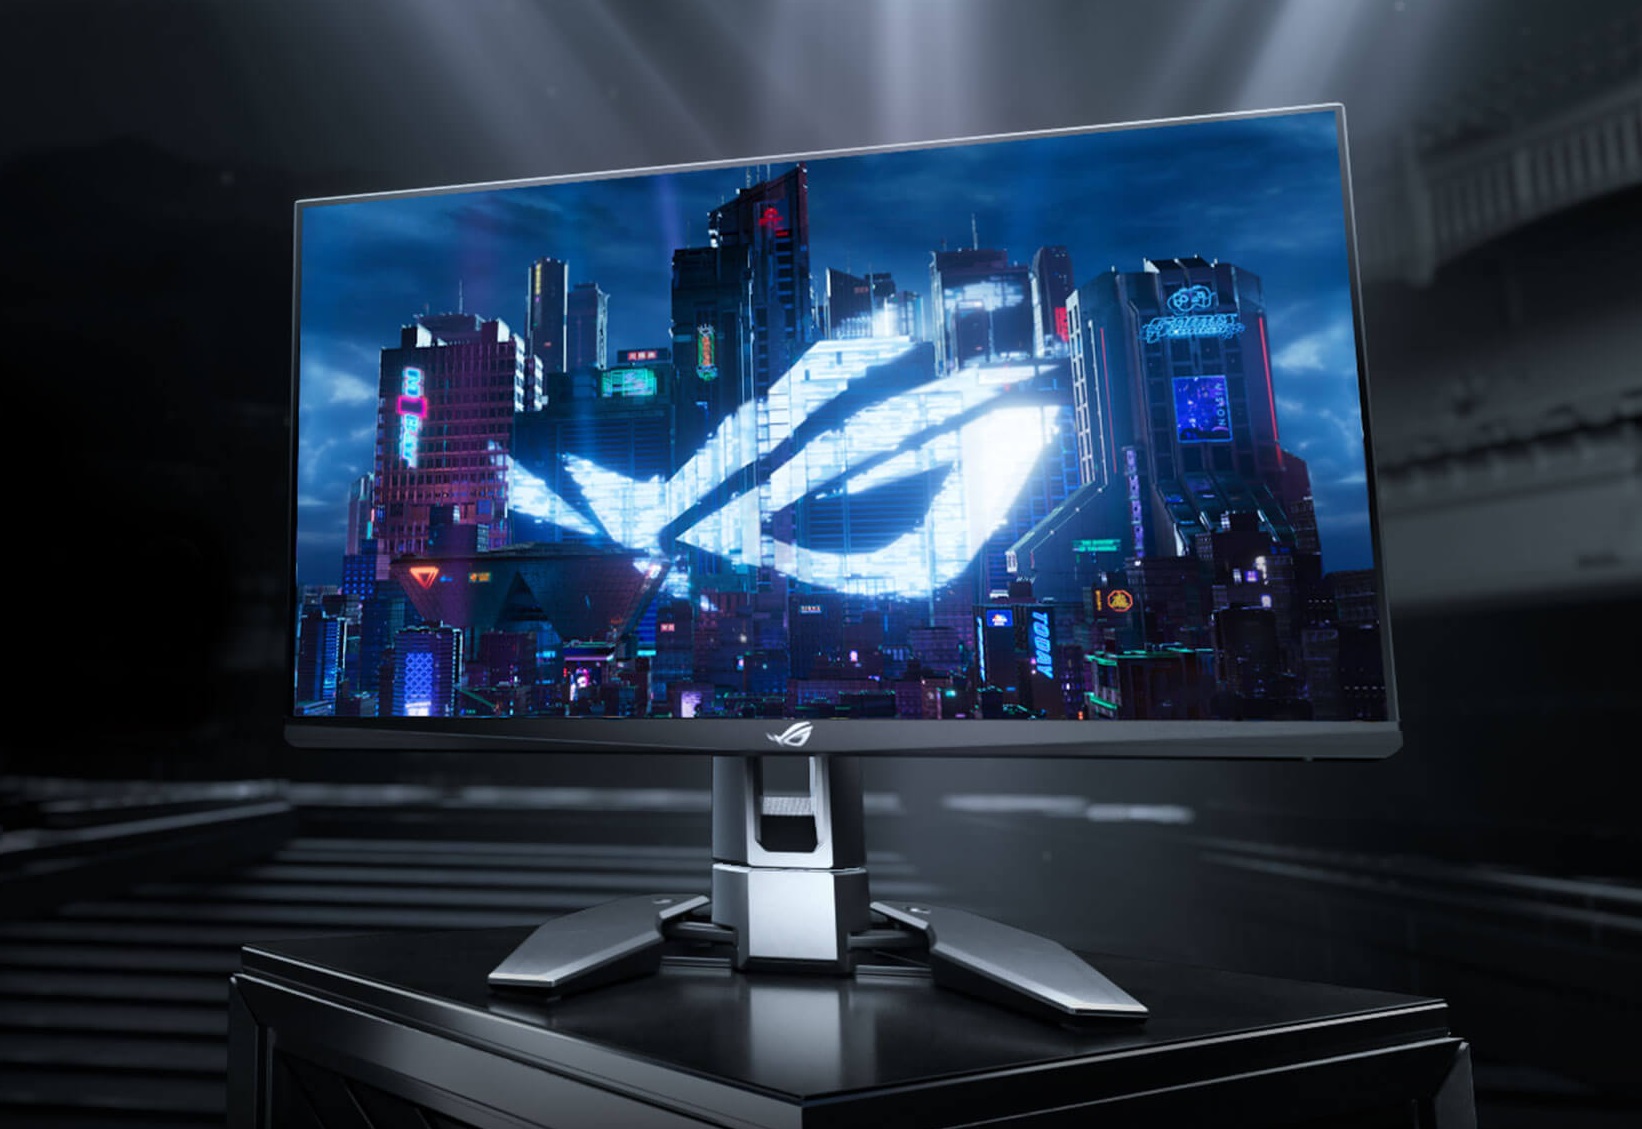 ASUS details their highly anticipated 540Hz ROG Swift Pro PG248QP display